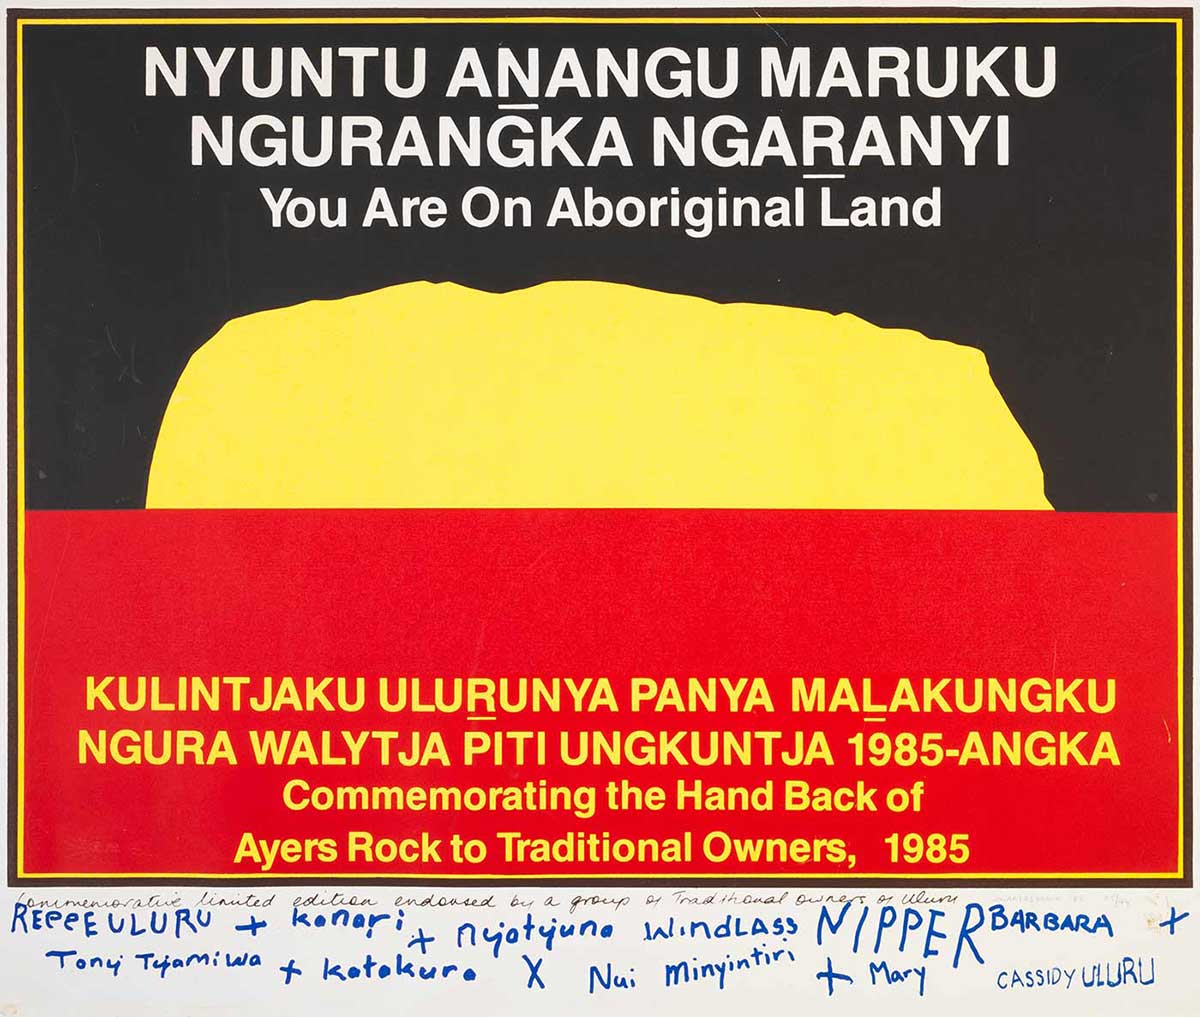 A limited first edition print poster similar in design to the black over red Aboriginal flag, but the sun in the centre has been replaced by a yellow silhouette of Uluru (Ayers Rock). 